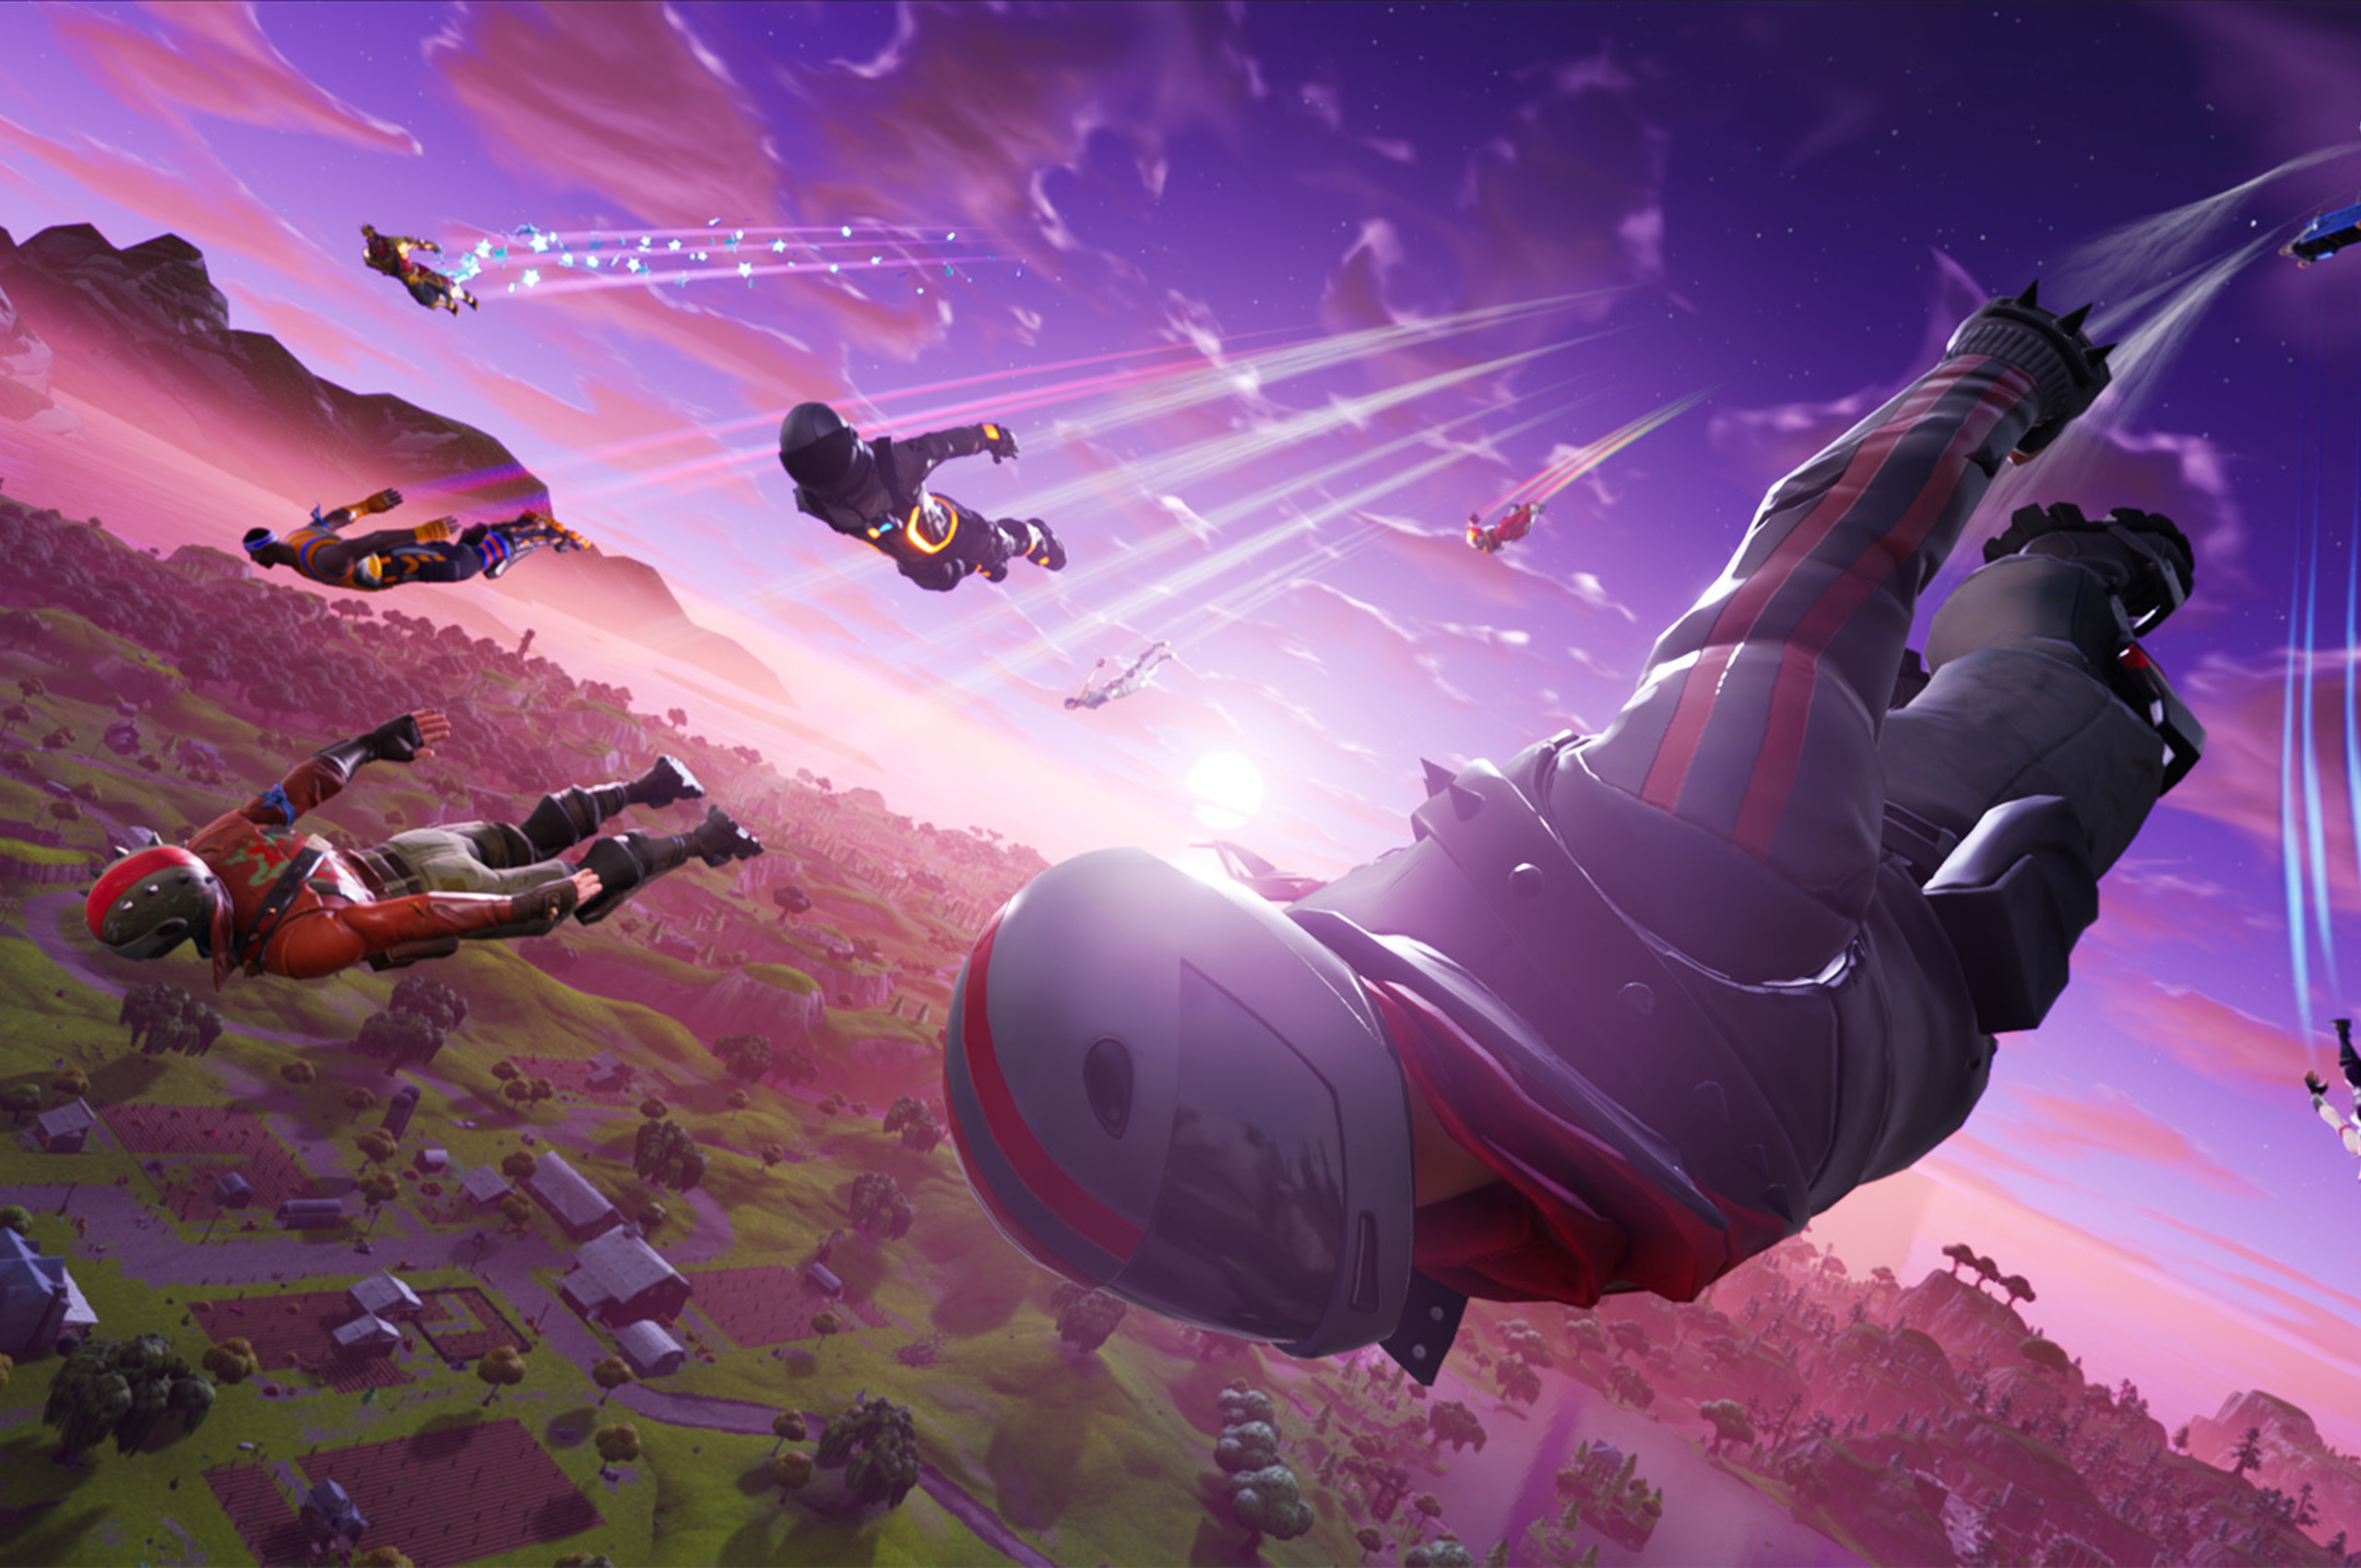 Fortnite had its biggest month ever in August